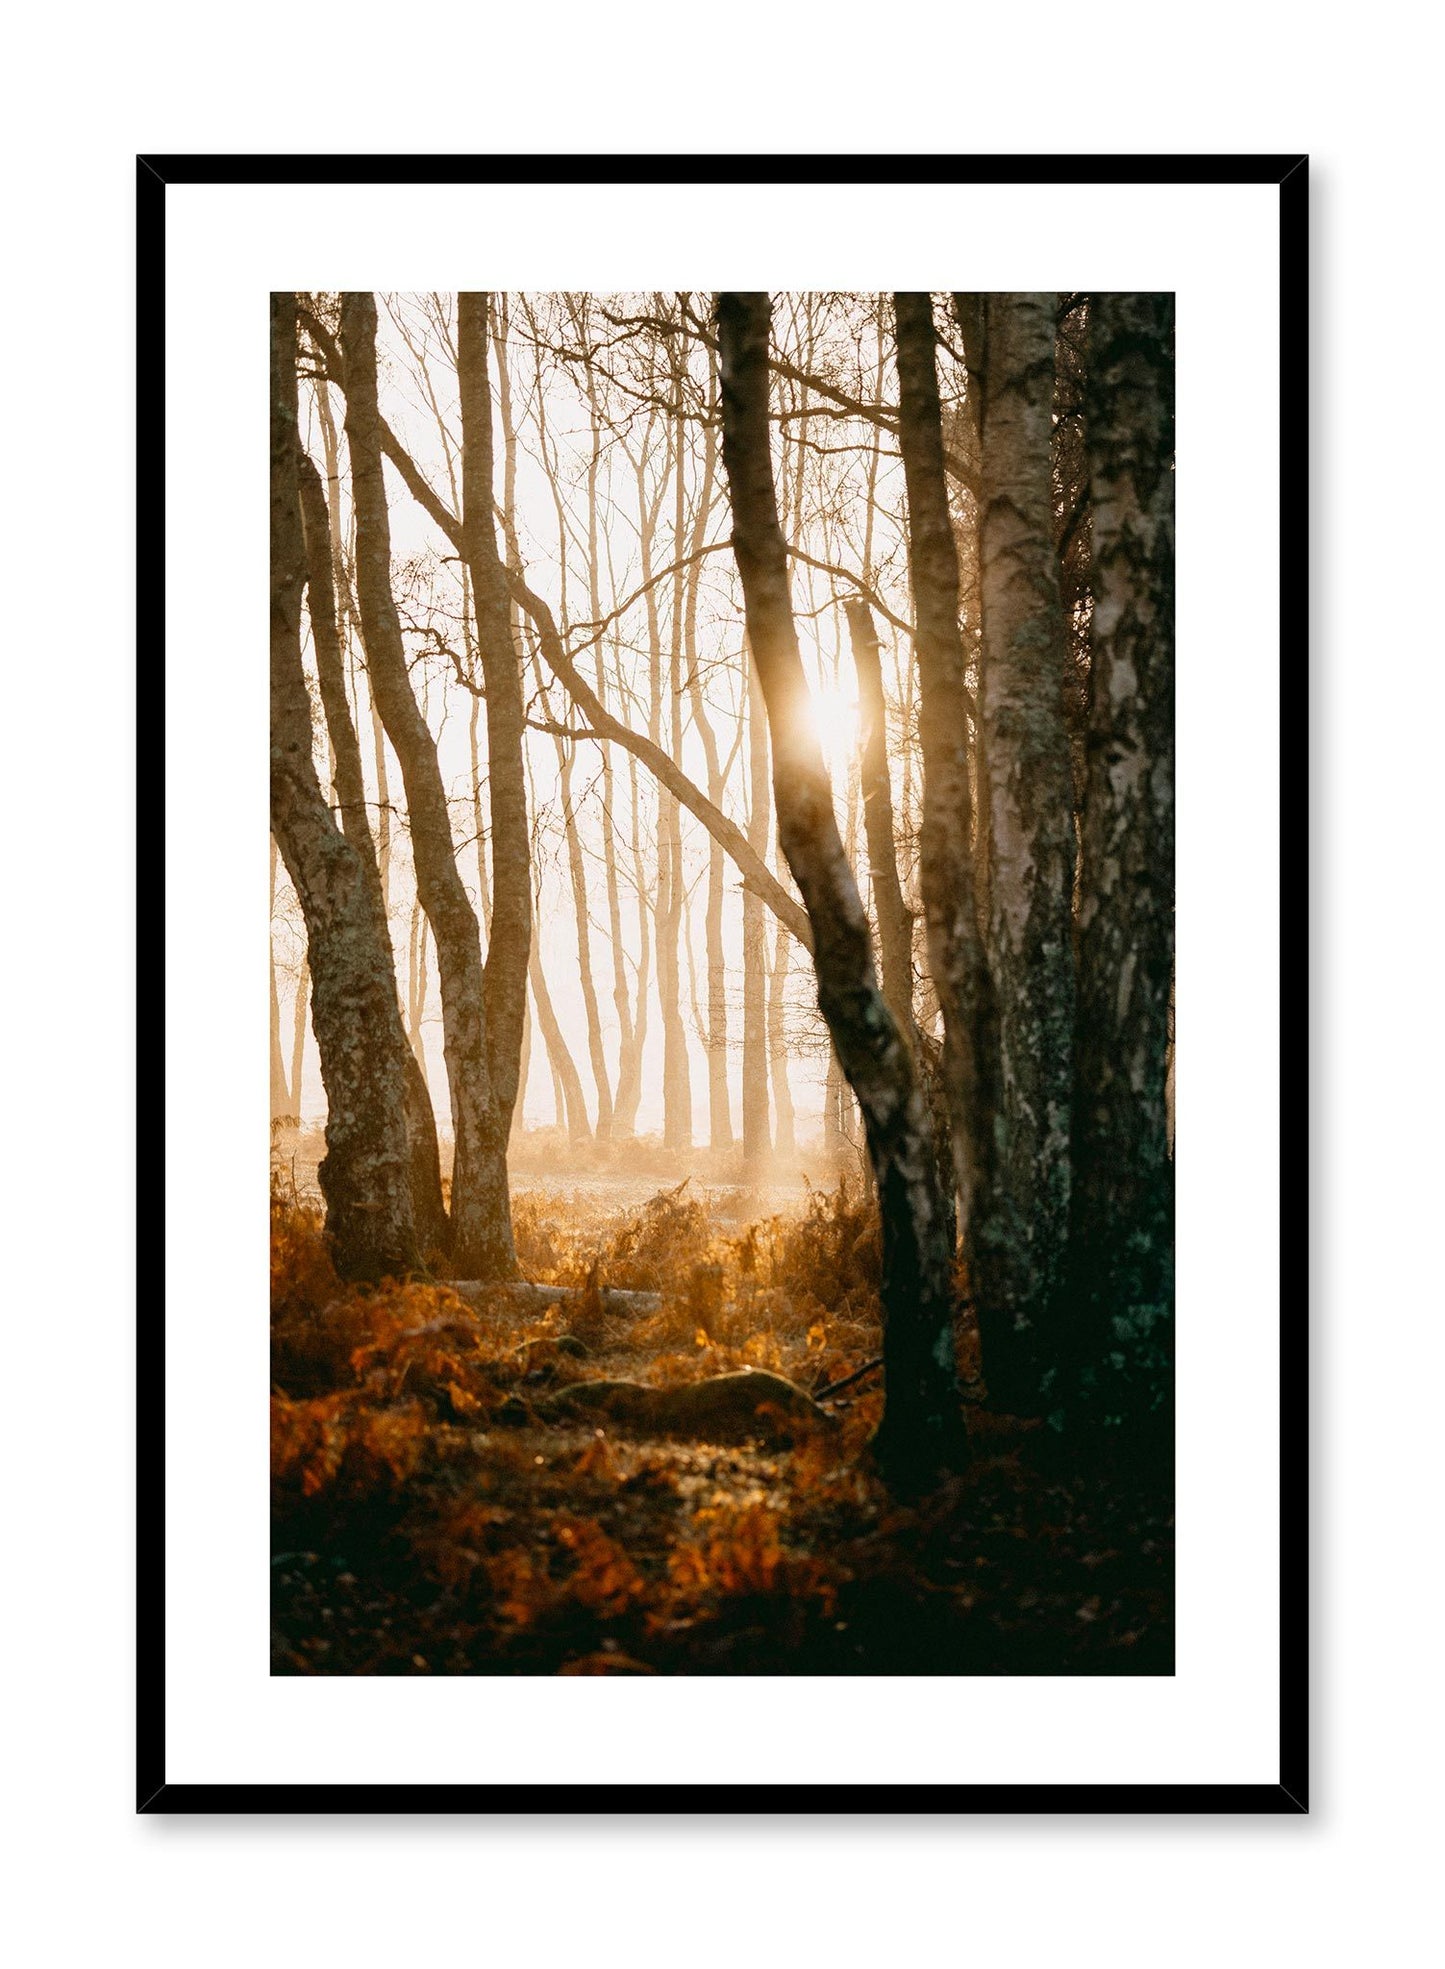 Twilight is a minimalist photography by Opposite Wall of a beaming sunlight illuminating the forest.